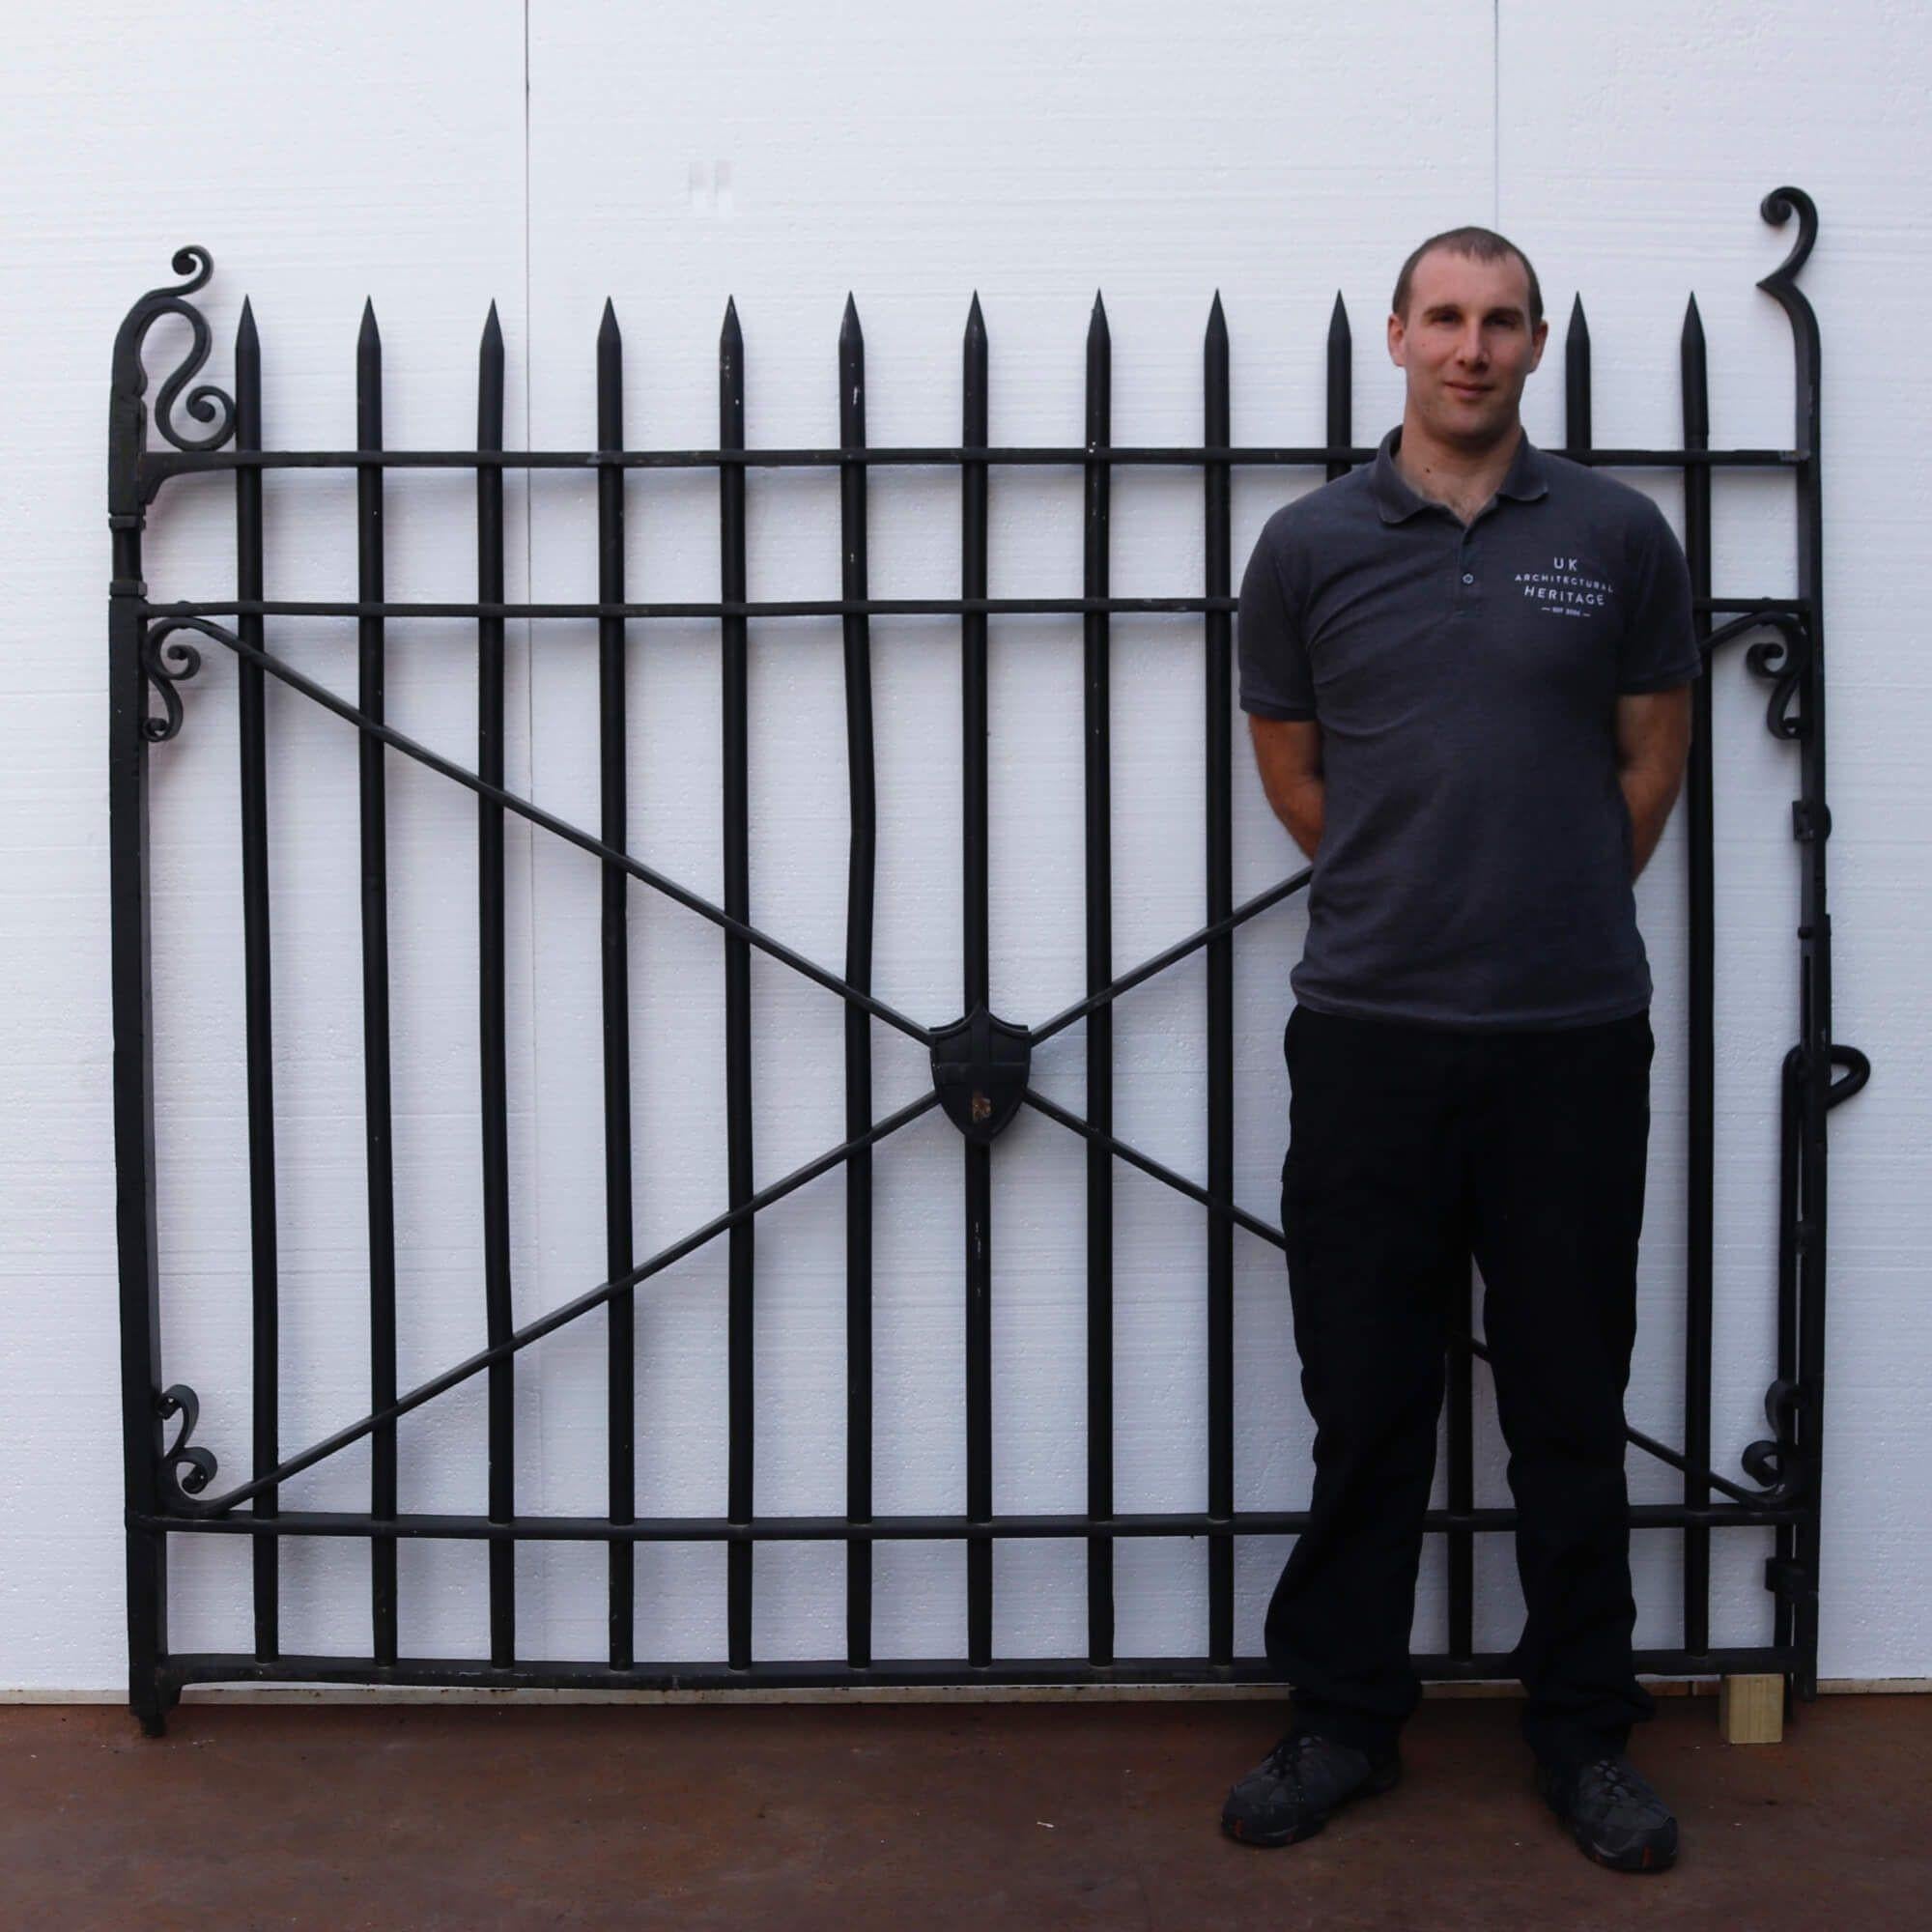 Pair of antique 20th century English wrought iron driveway gates. These substantially constructed blacksmith made gates have a significant decorative shield of St George’s cross, which appears on England’s flag. There is also a pedestrian gate at